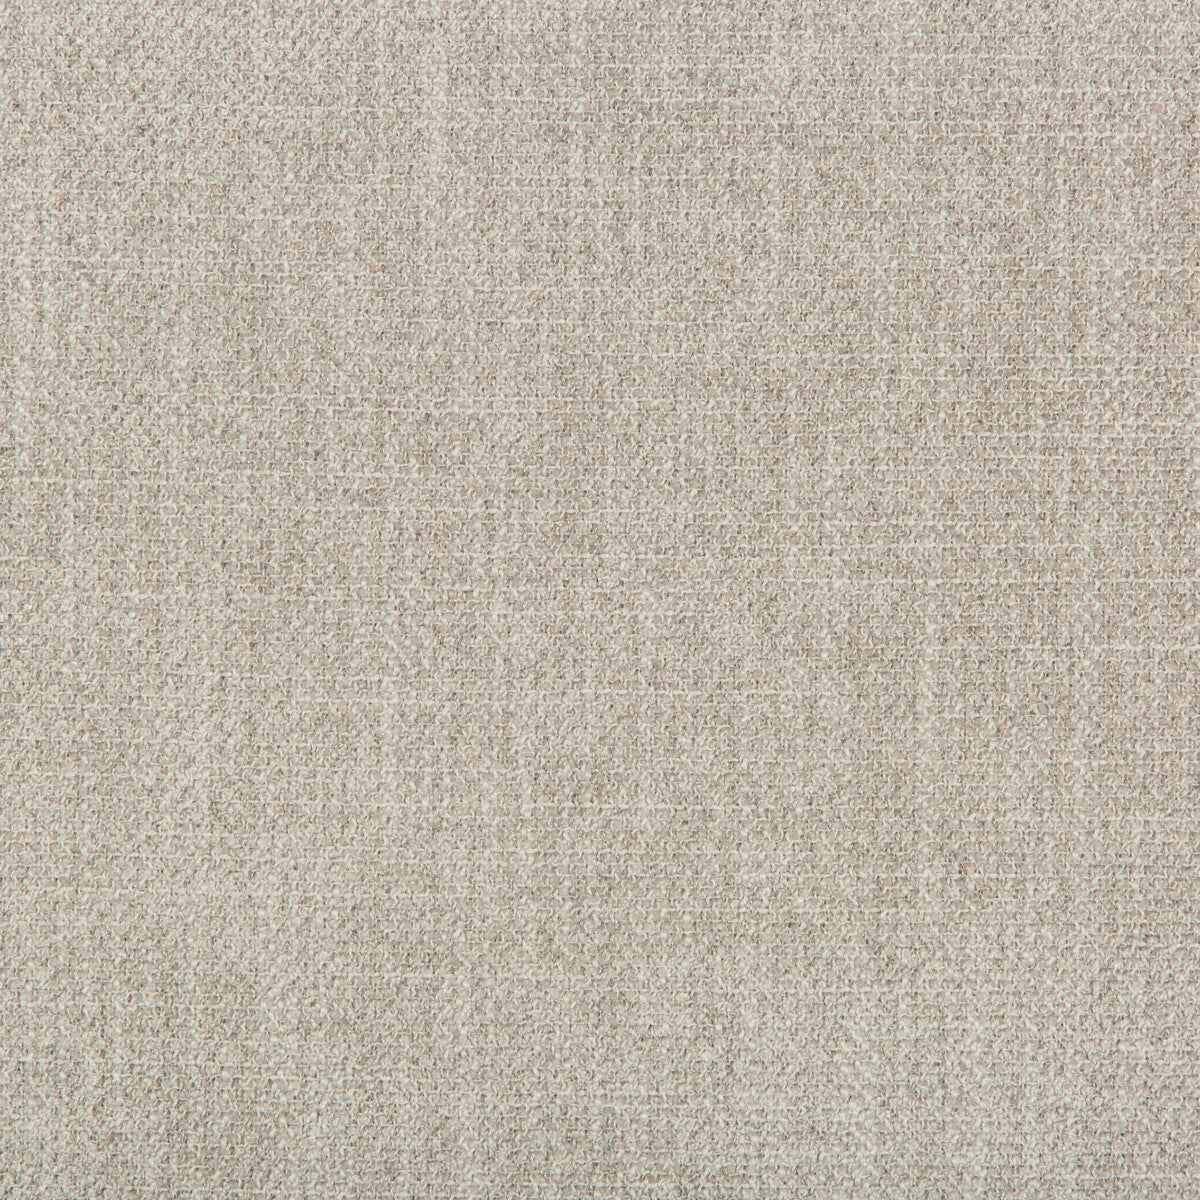 Kf Smt fabric - pattern 35390.16.0 - by Kravet Smart in the Performance Crypton Home collection